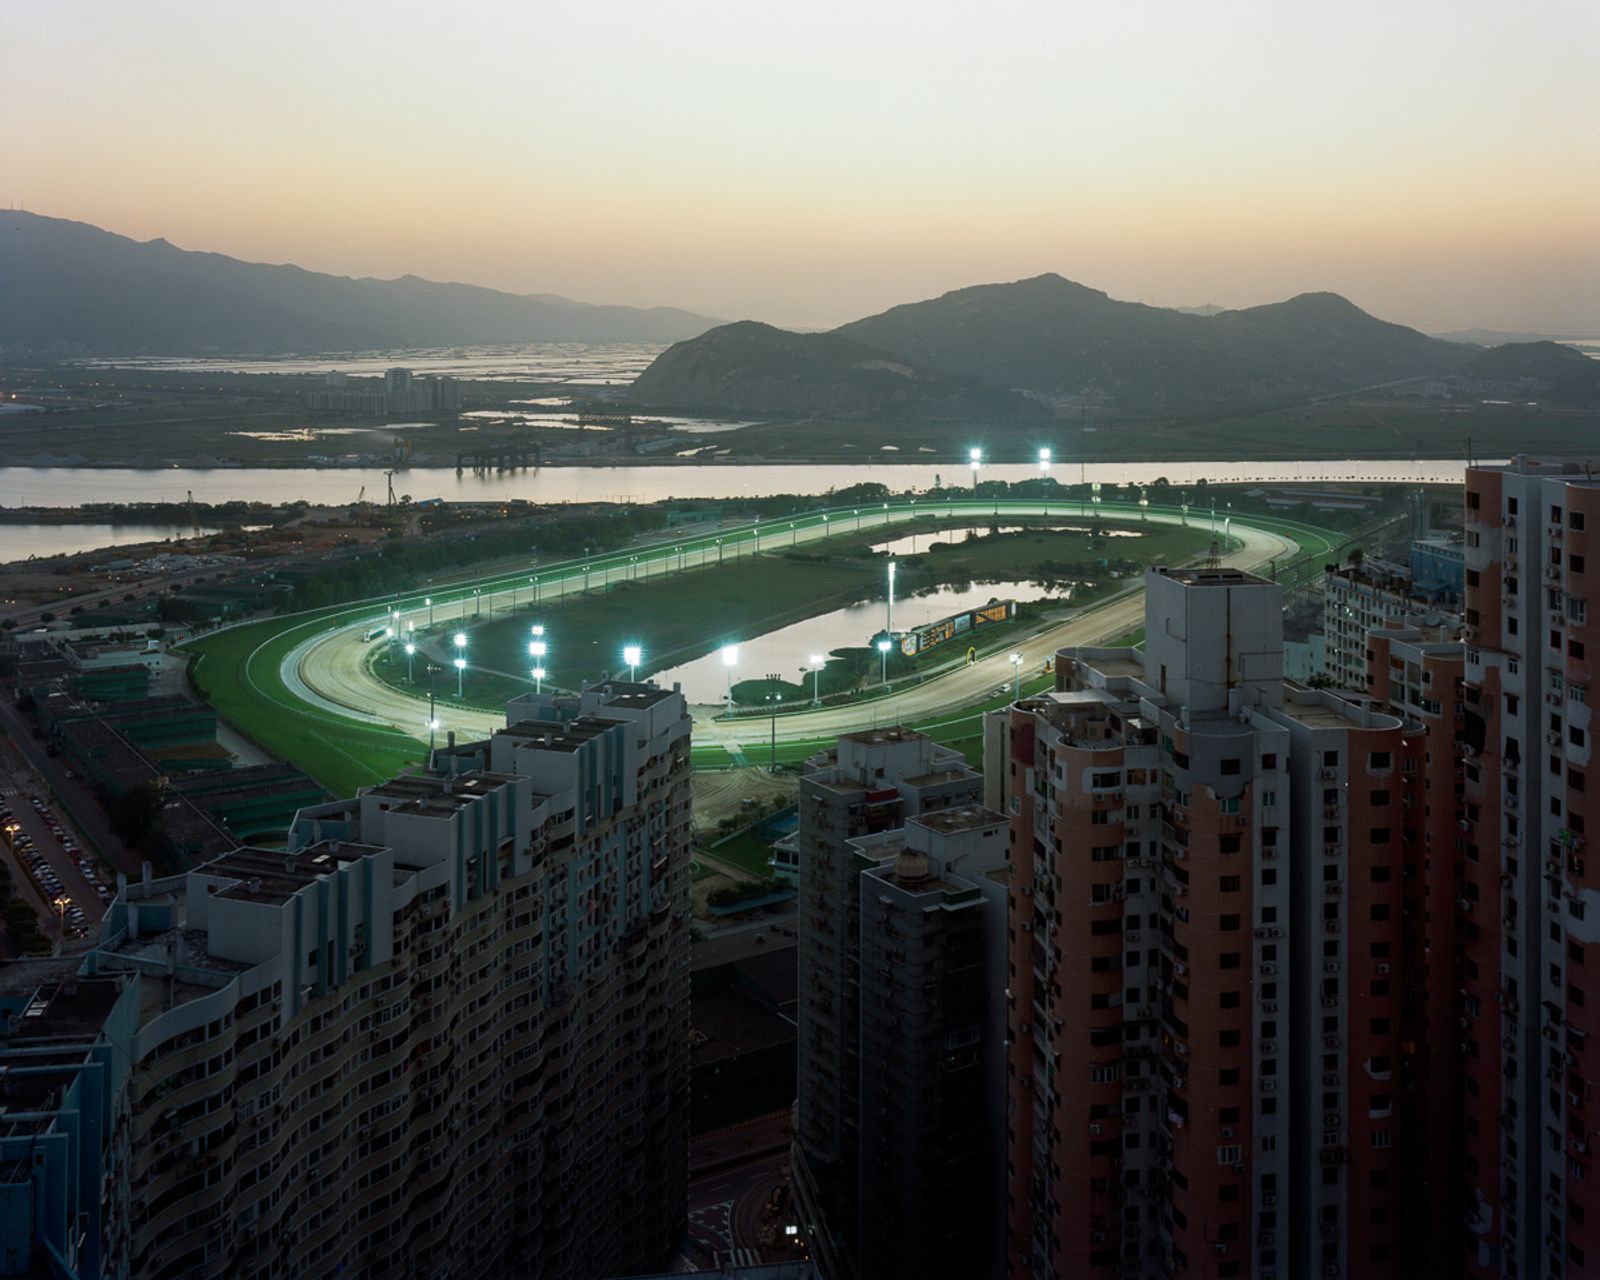 © Adam Lampton - Image from the Macao: City of Dreams photography project